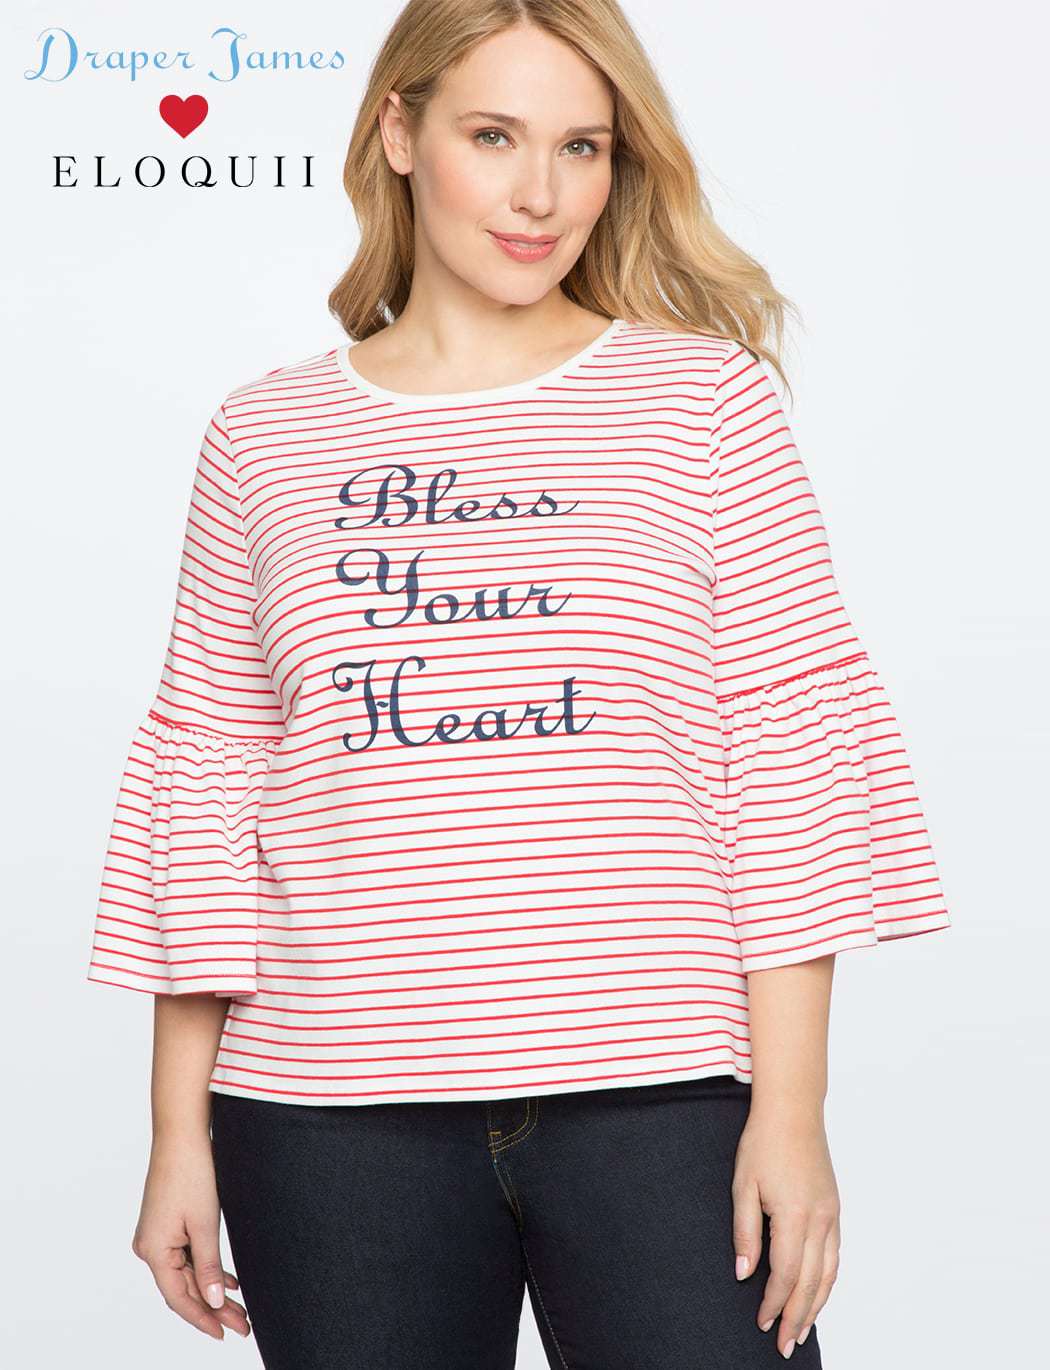 Eloquii for Draper James Bless Your Heart Striped tee with ruffle sleeves